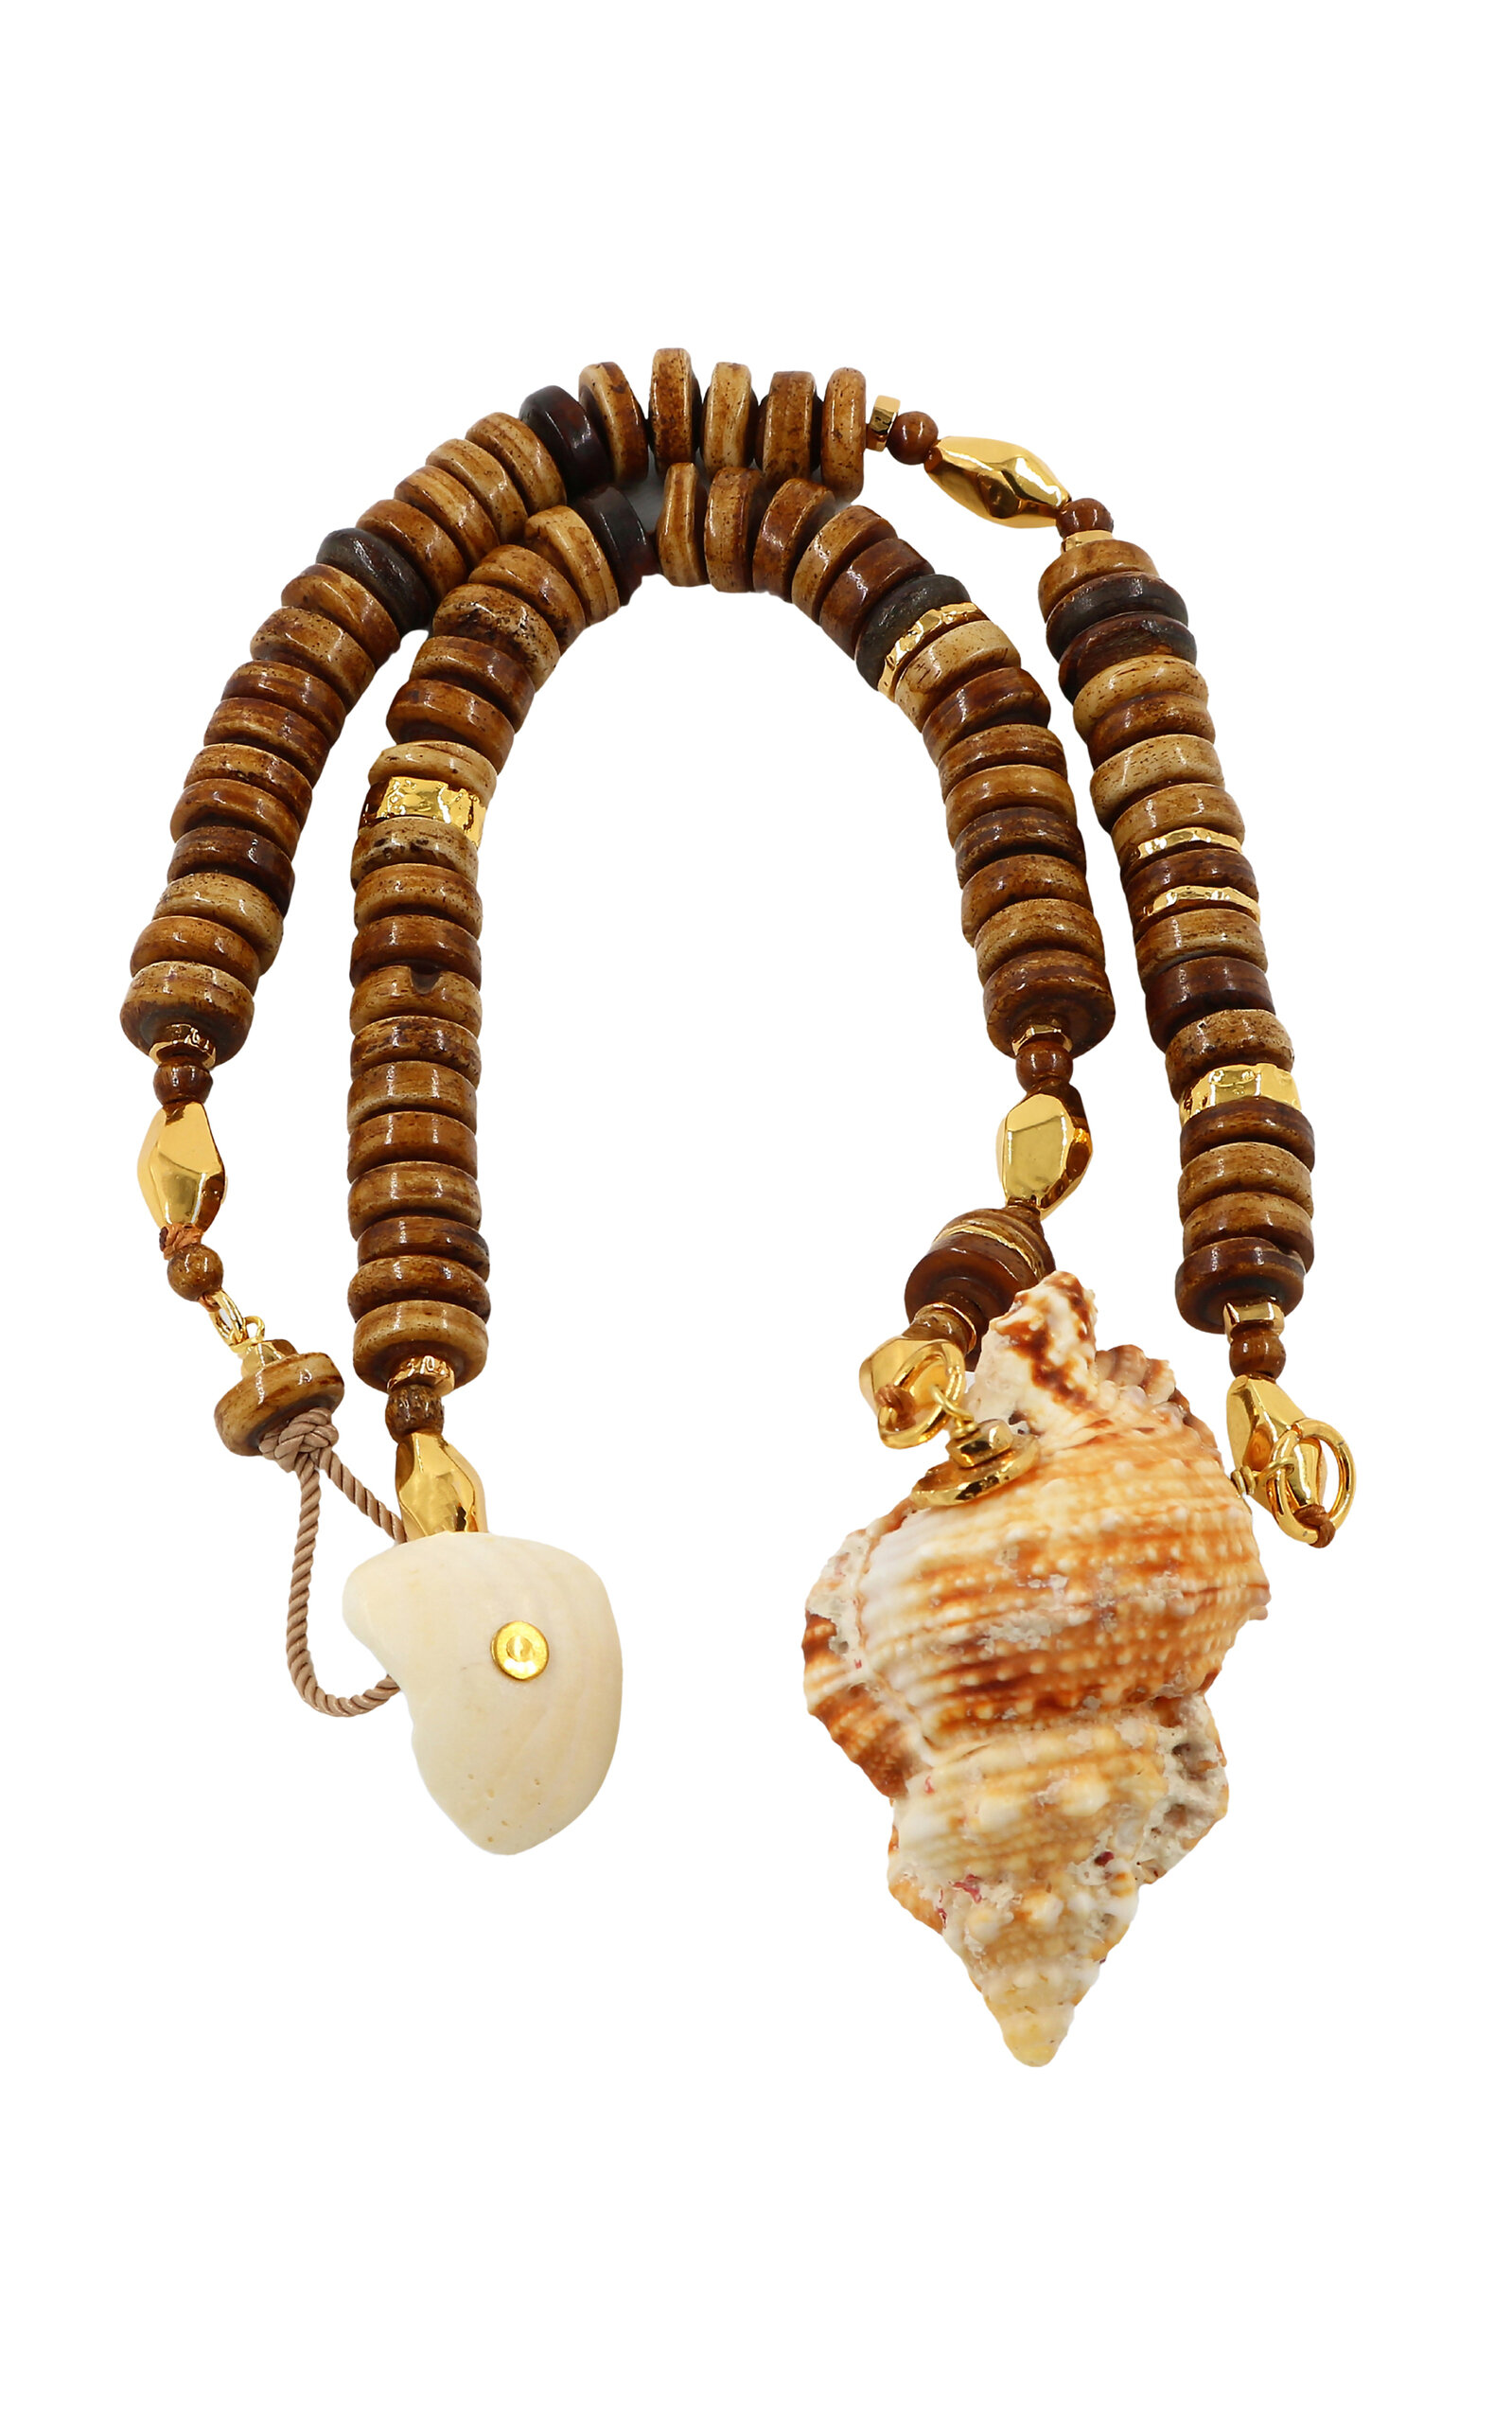 Samsara Vintage Wood Beads and Shell Necklace